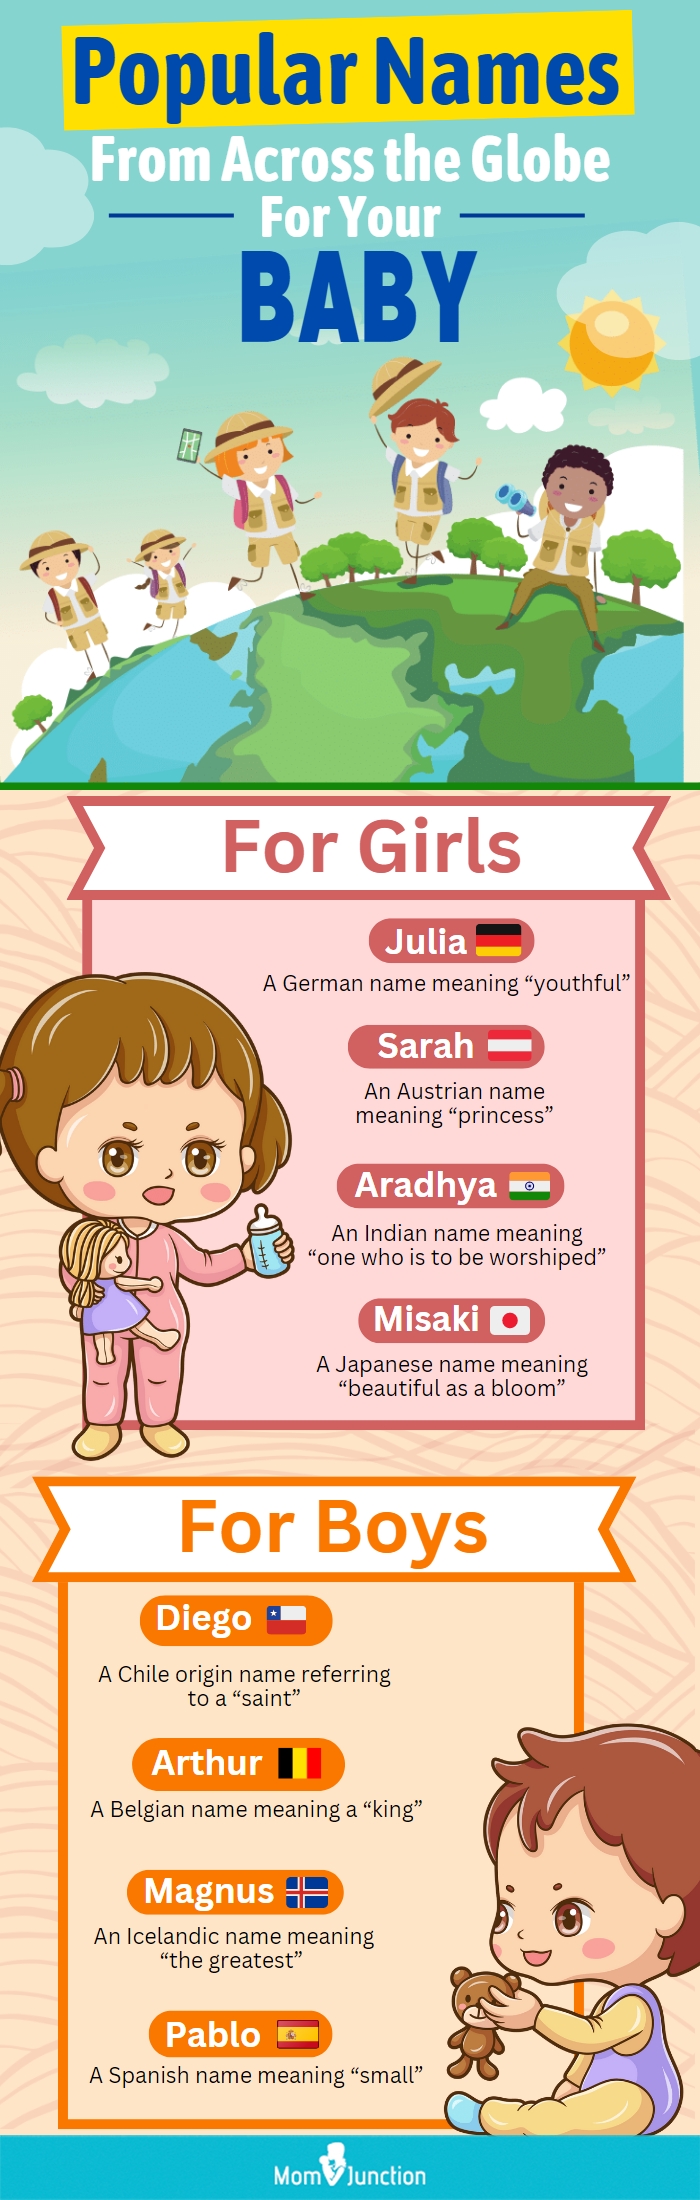 popular names from across the globe for your baby [infographic]